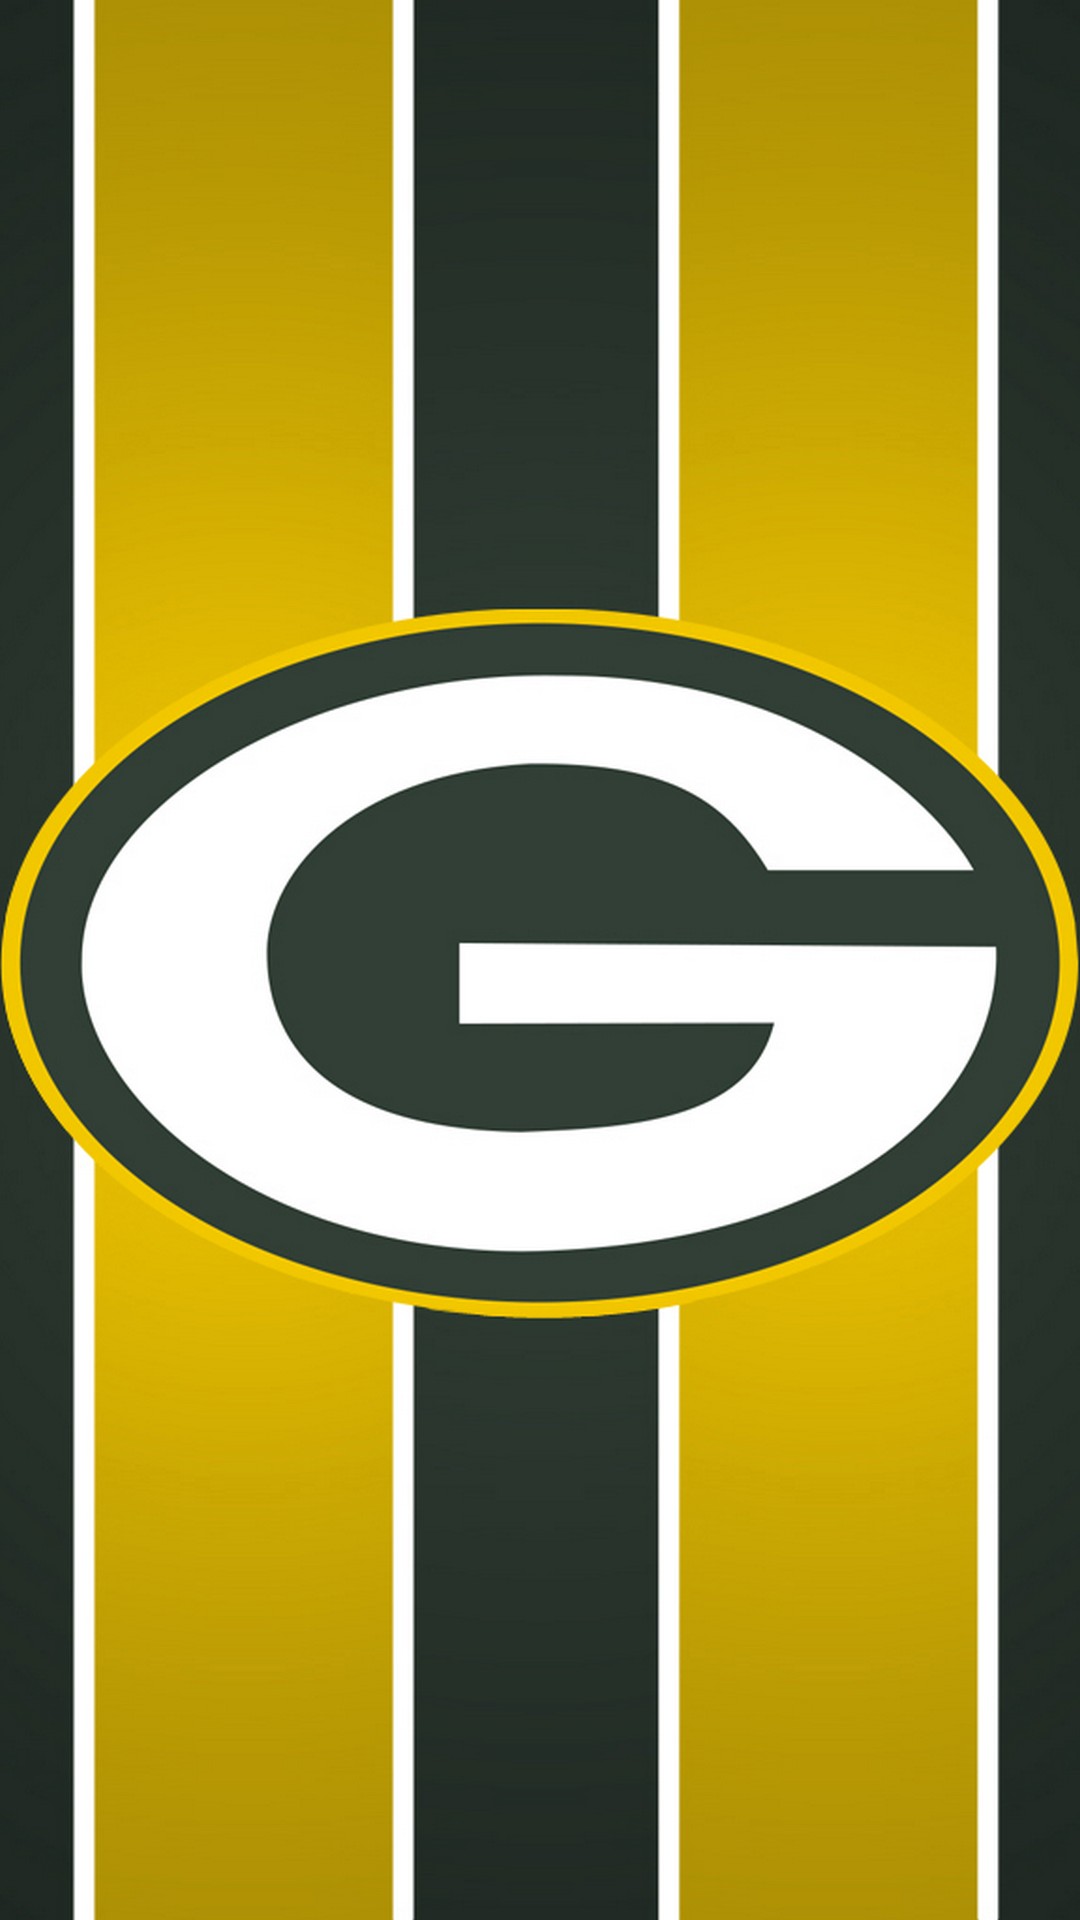 Green Bay Packers iPhone 6 Wallpaper With high-resolution 1080X1920 pixel. Download and set as wallpaper for Apple iPhone X, XS Max, XR, 8, 7, 6, SE, iPad, Android